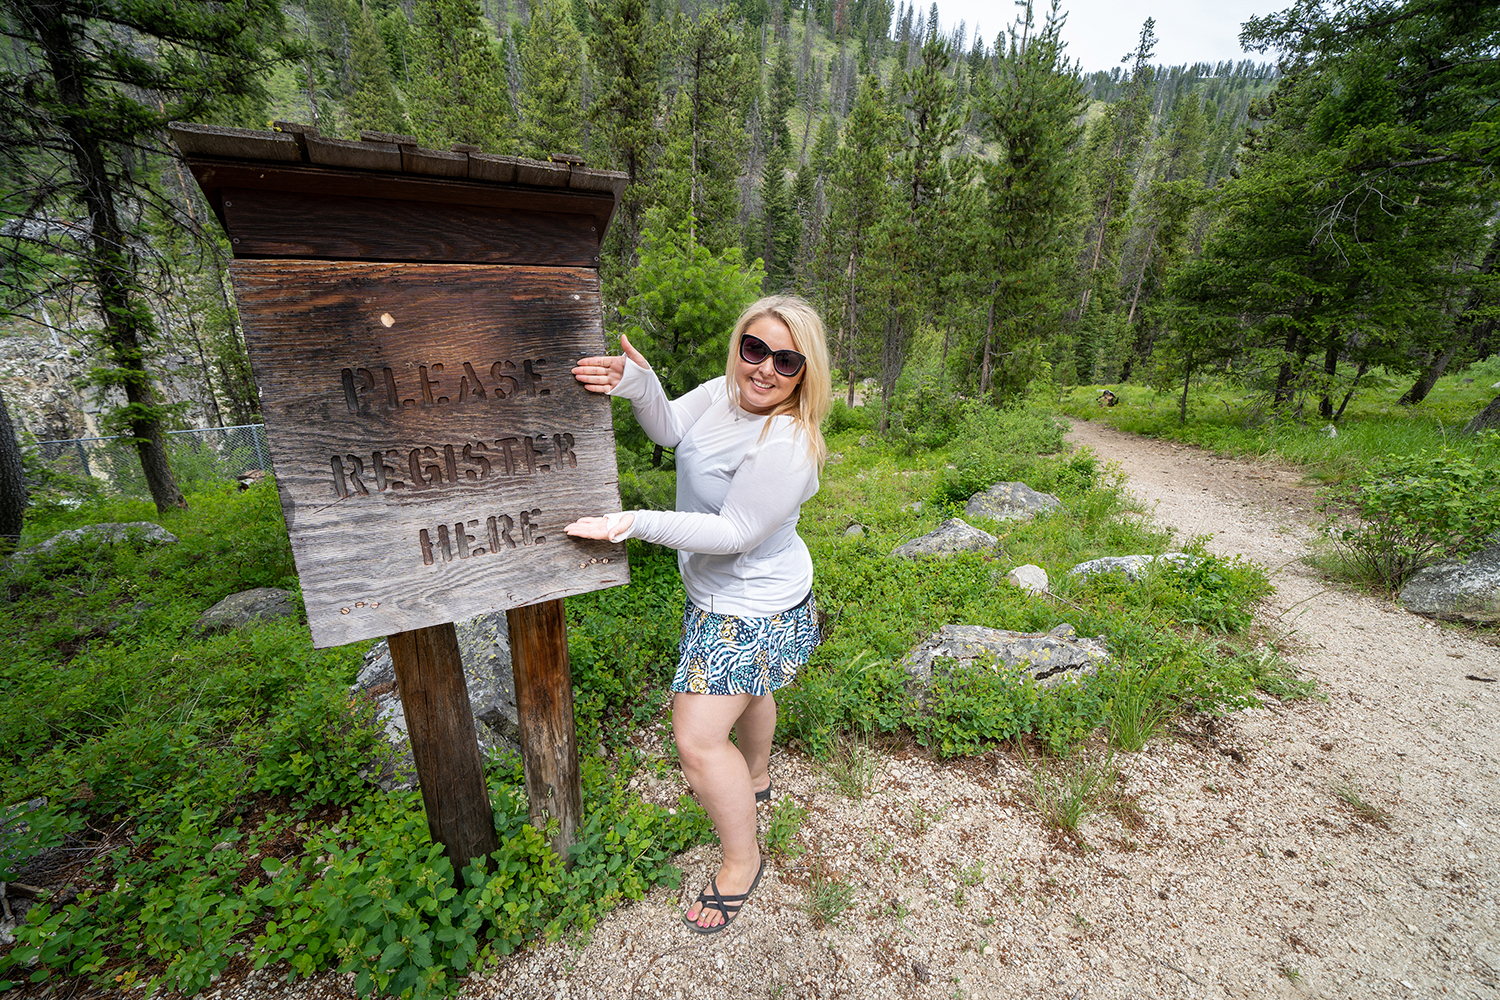 Blonde woman poses near a sign for campers and hikers to register - Please Register Here - at a campground in the Sawtooth Wilderness National Forest in Idaho